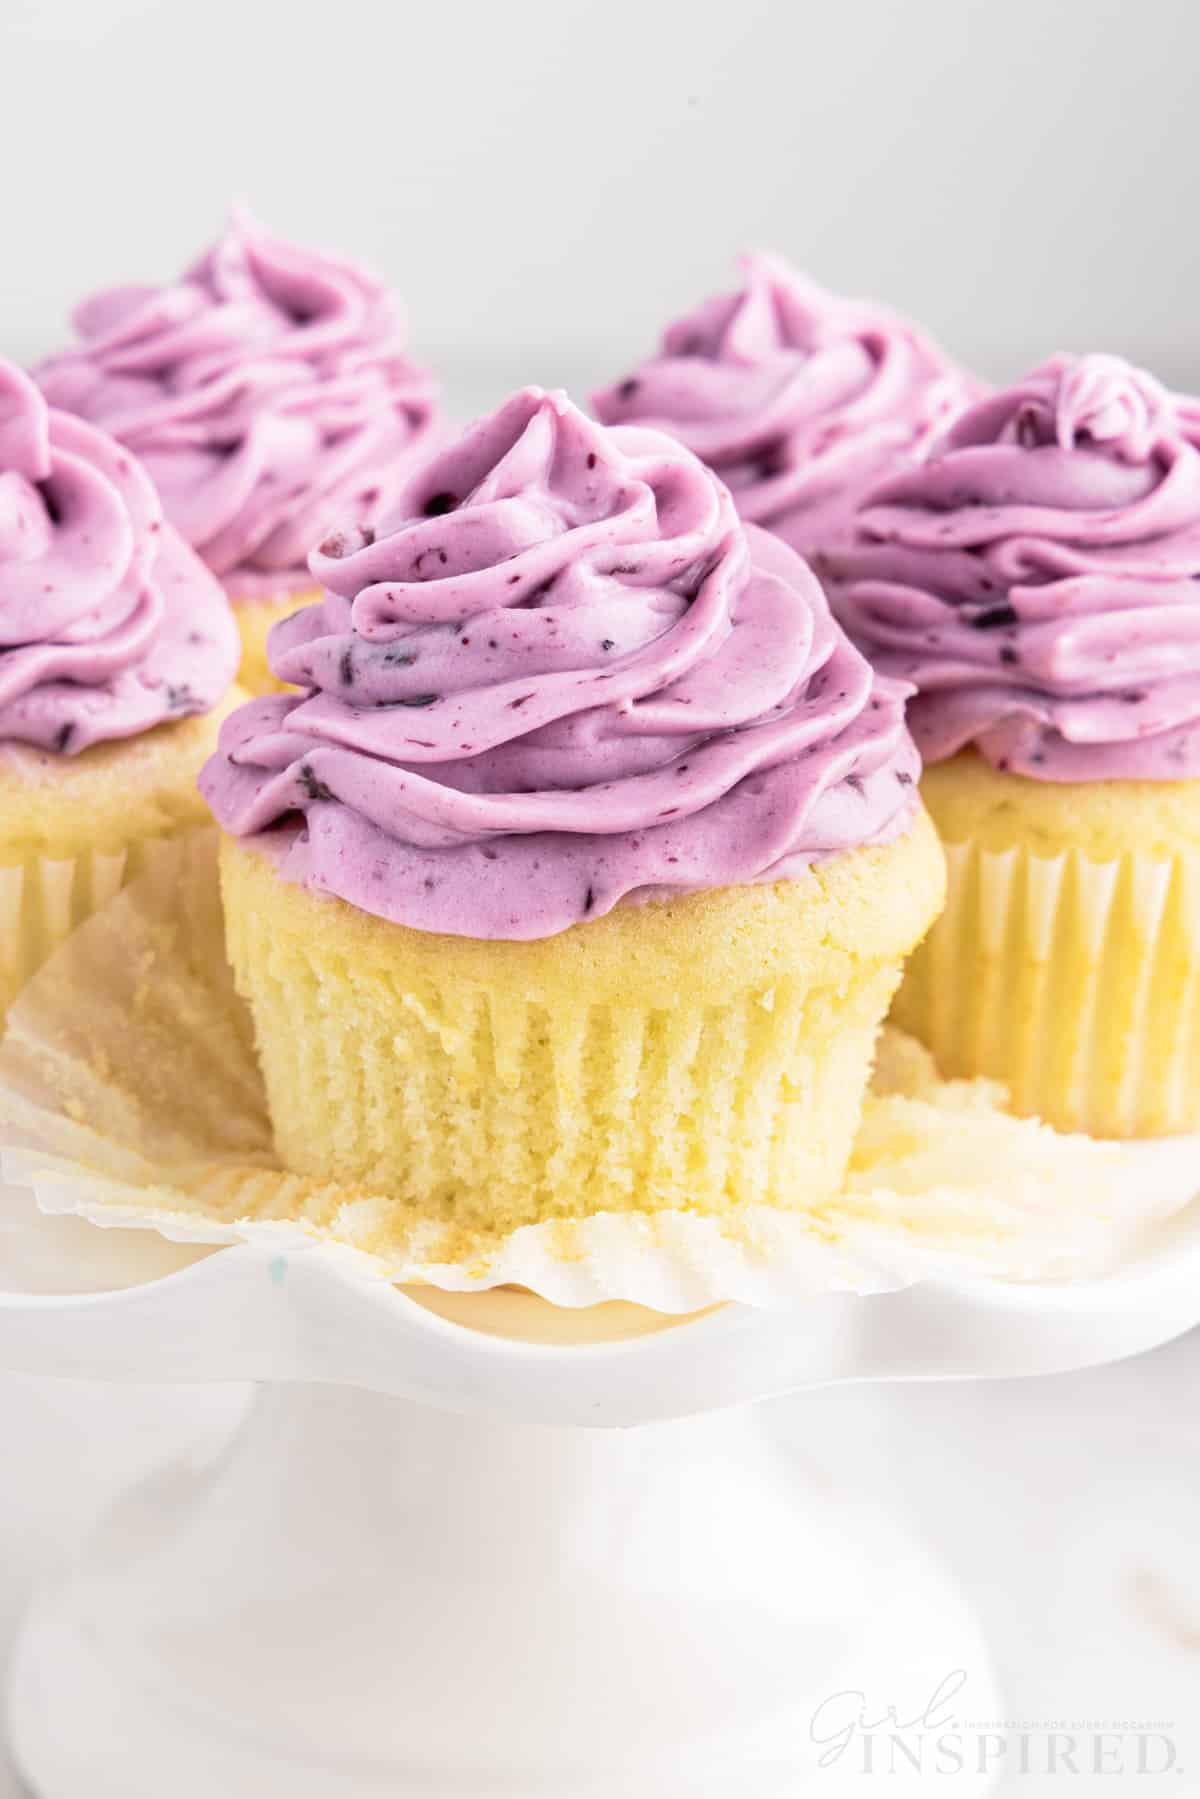 Blueberry Cream Cheese Frosting – NaBakery